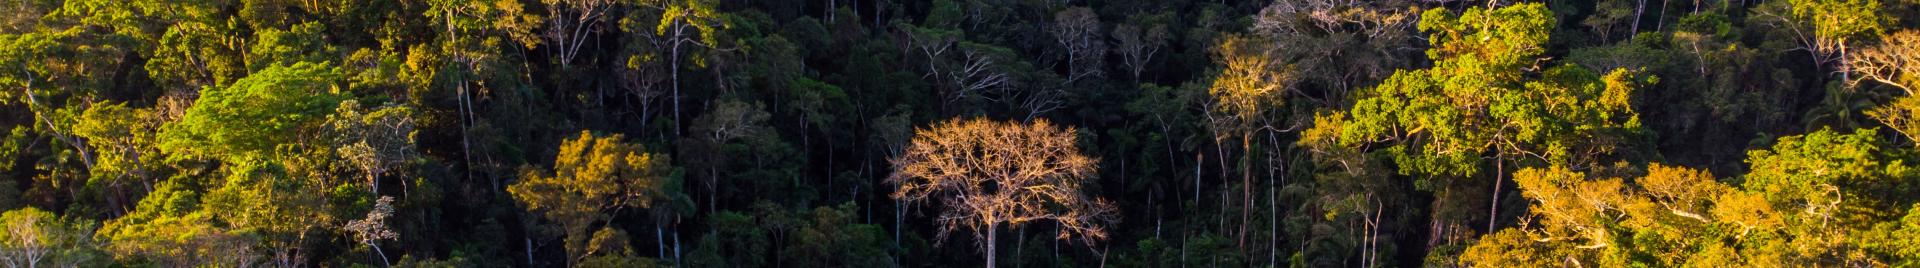 New study confirms FSC-certified forests help wildlife thrive in the ...